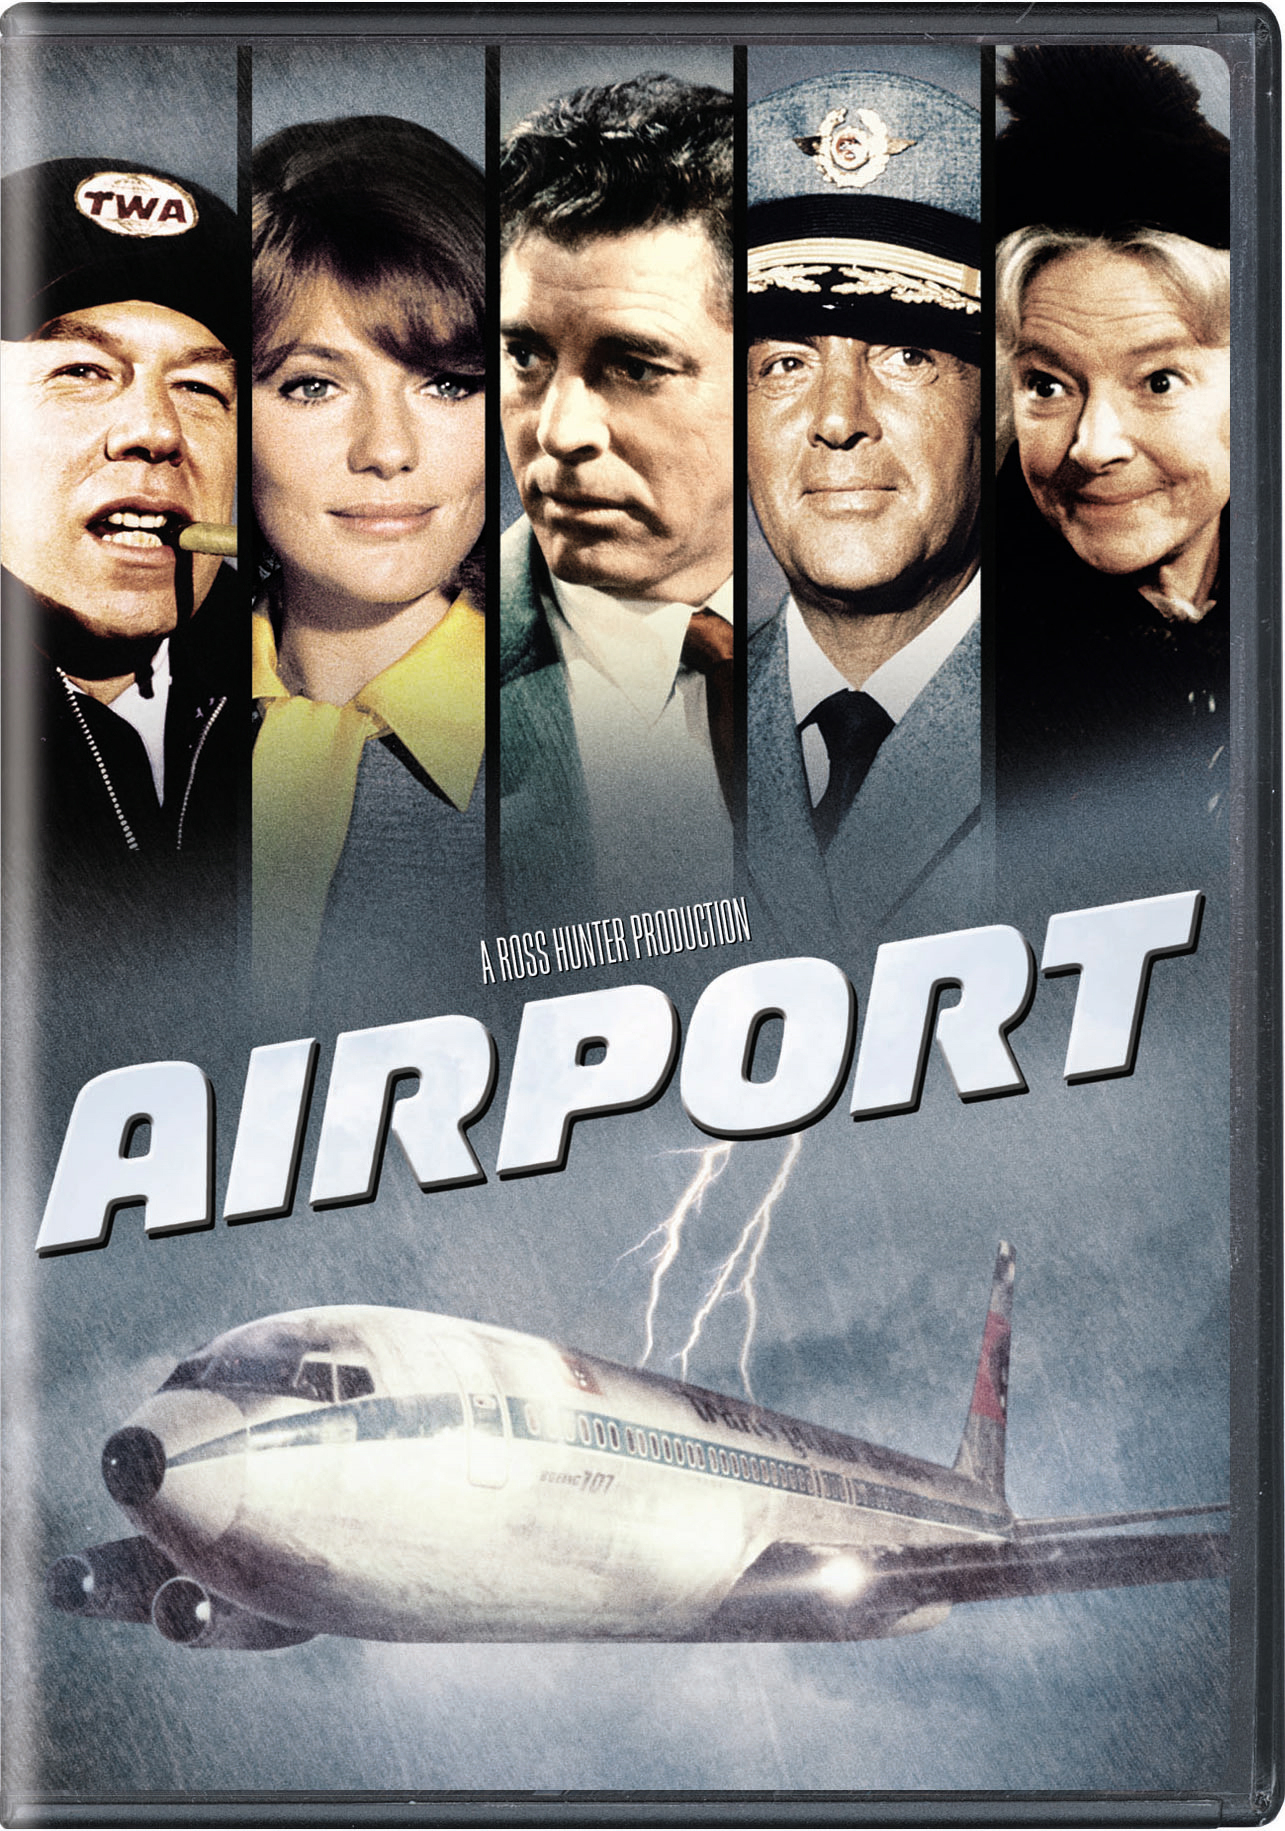 Airport (DVD + Digital Copy) - DVD [ 1970 ]  - Action Movies On DVD - Movies On GRUV